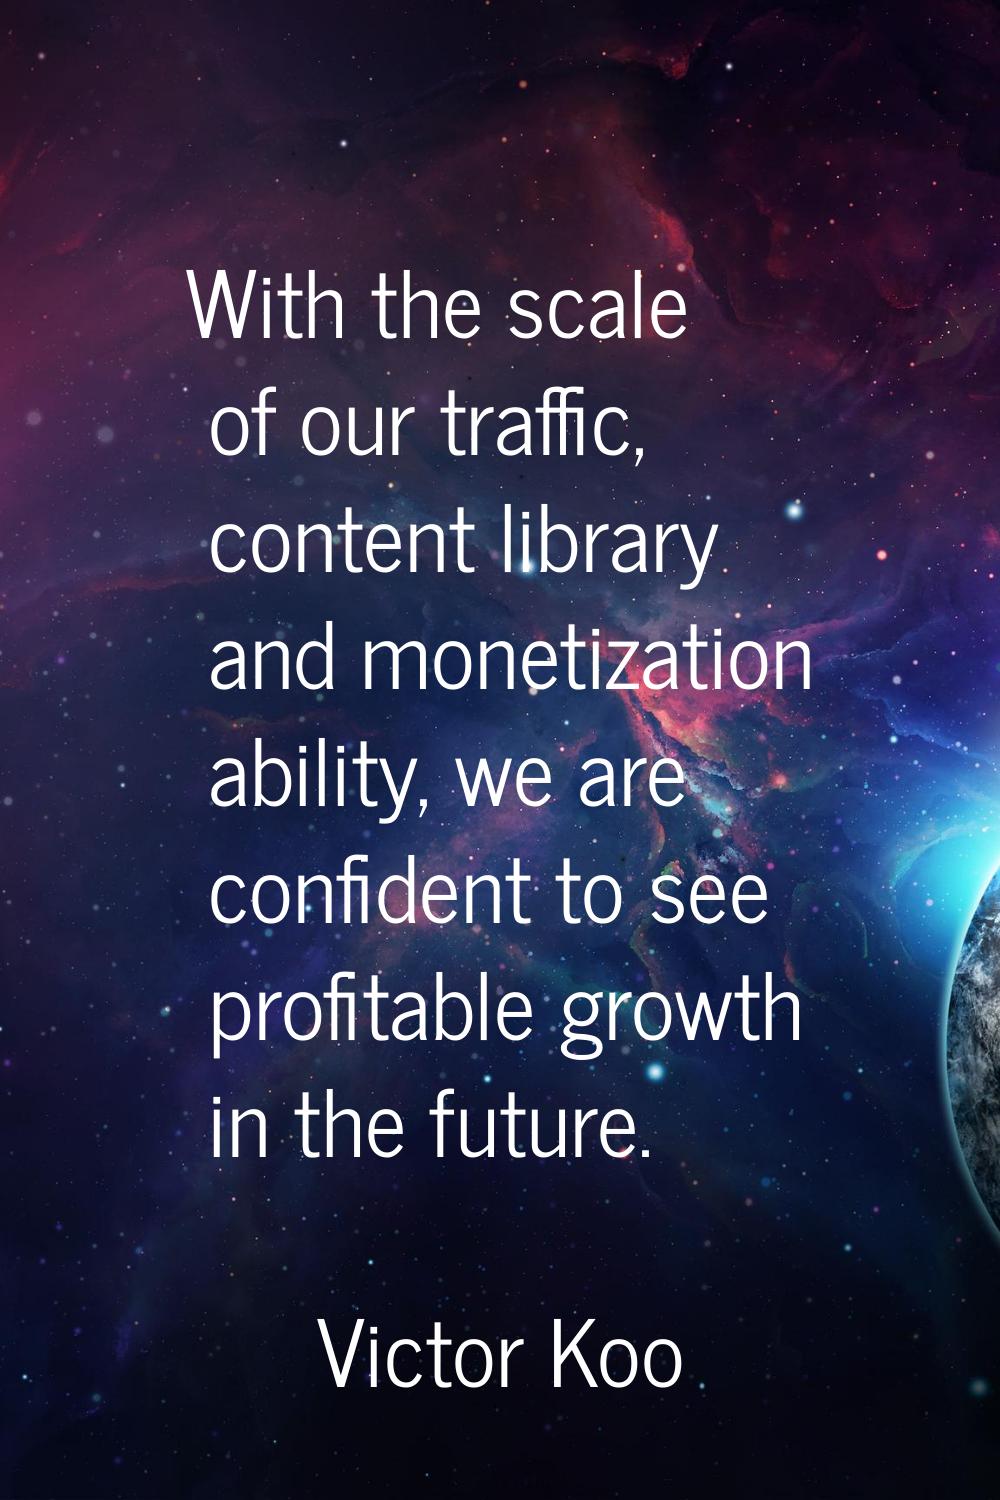 With the scale of our traffic, content library and monetization ability, we are confident to see pr